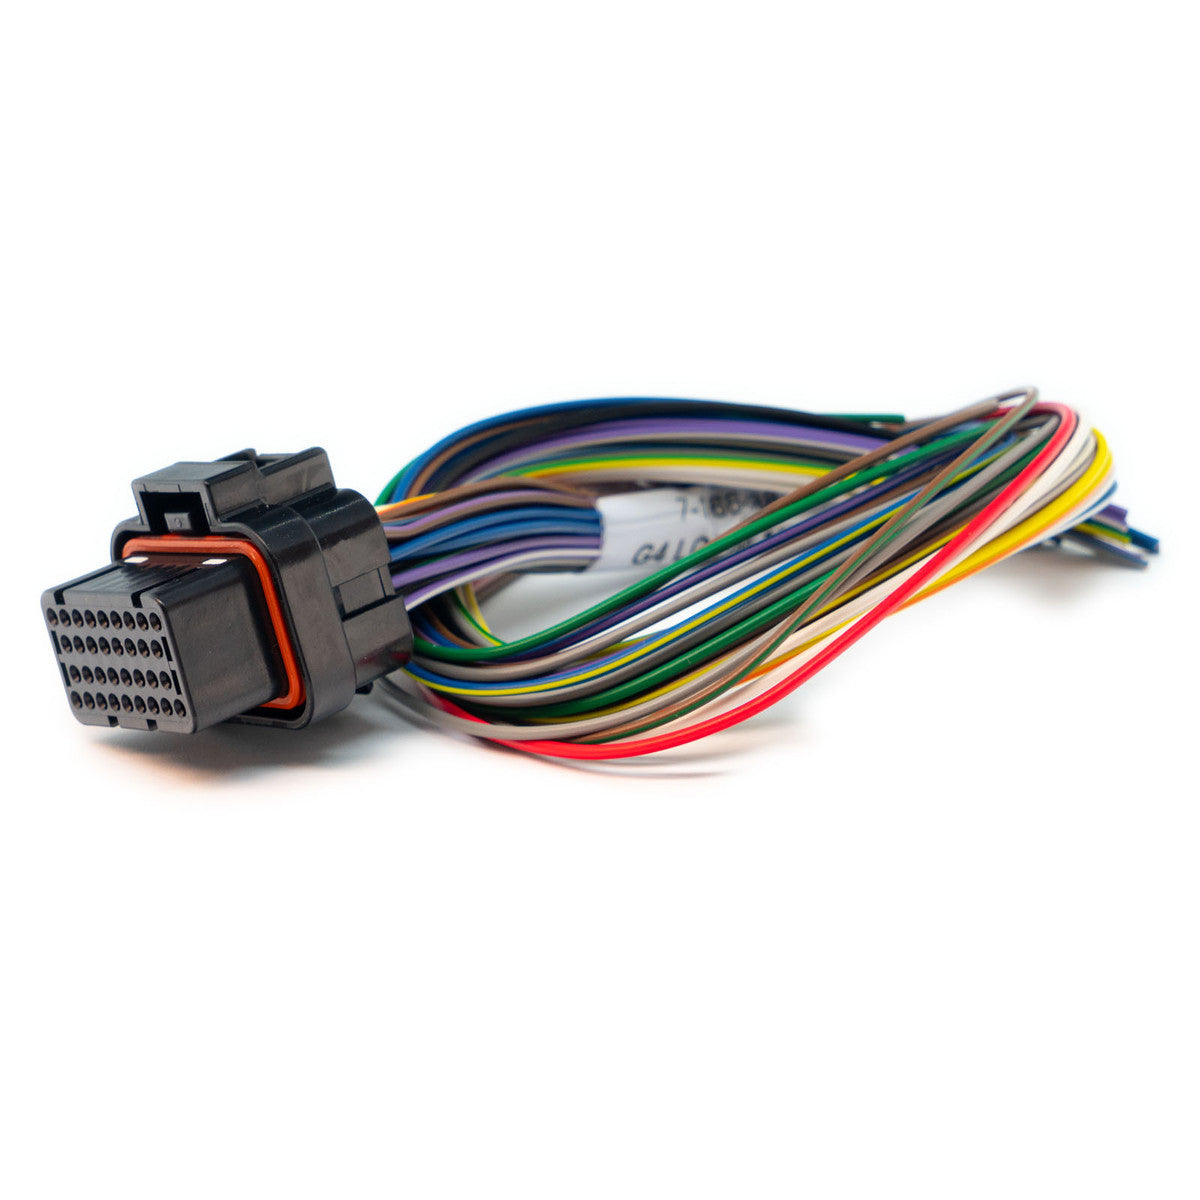 Loom B 400mm - All wireIn ECUs (not required for Atom or Monsoon)